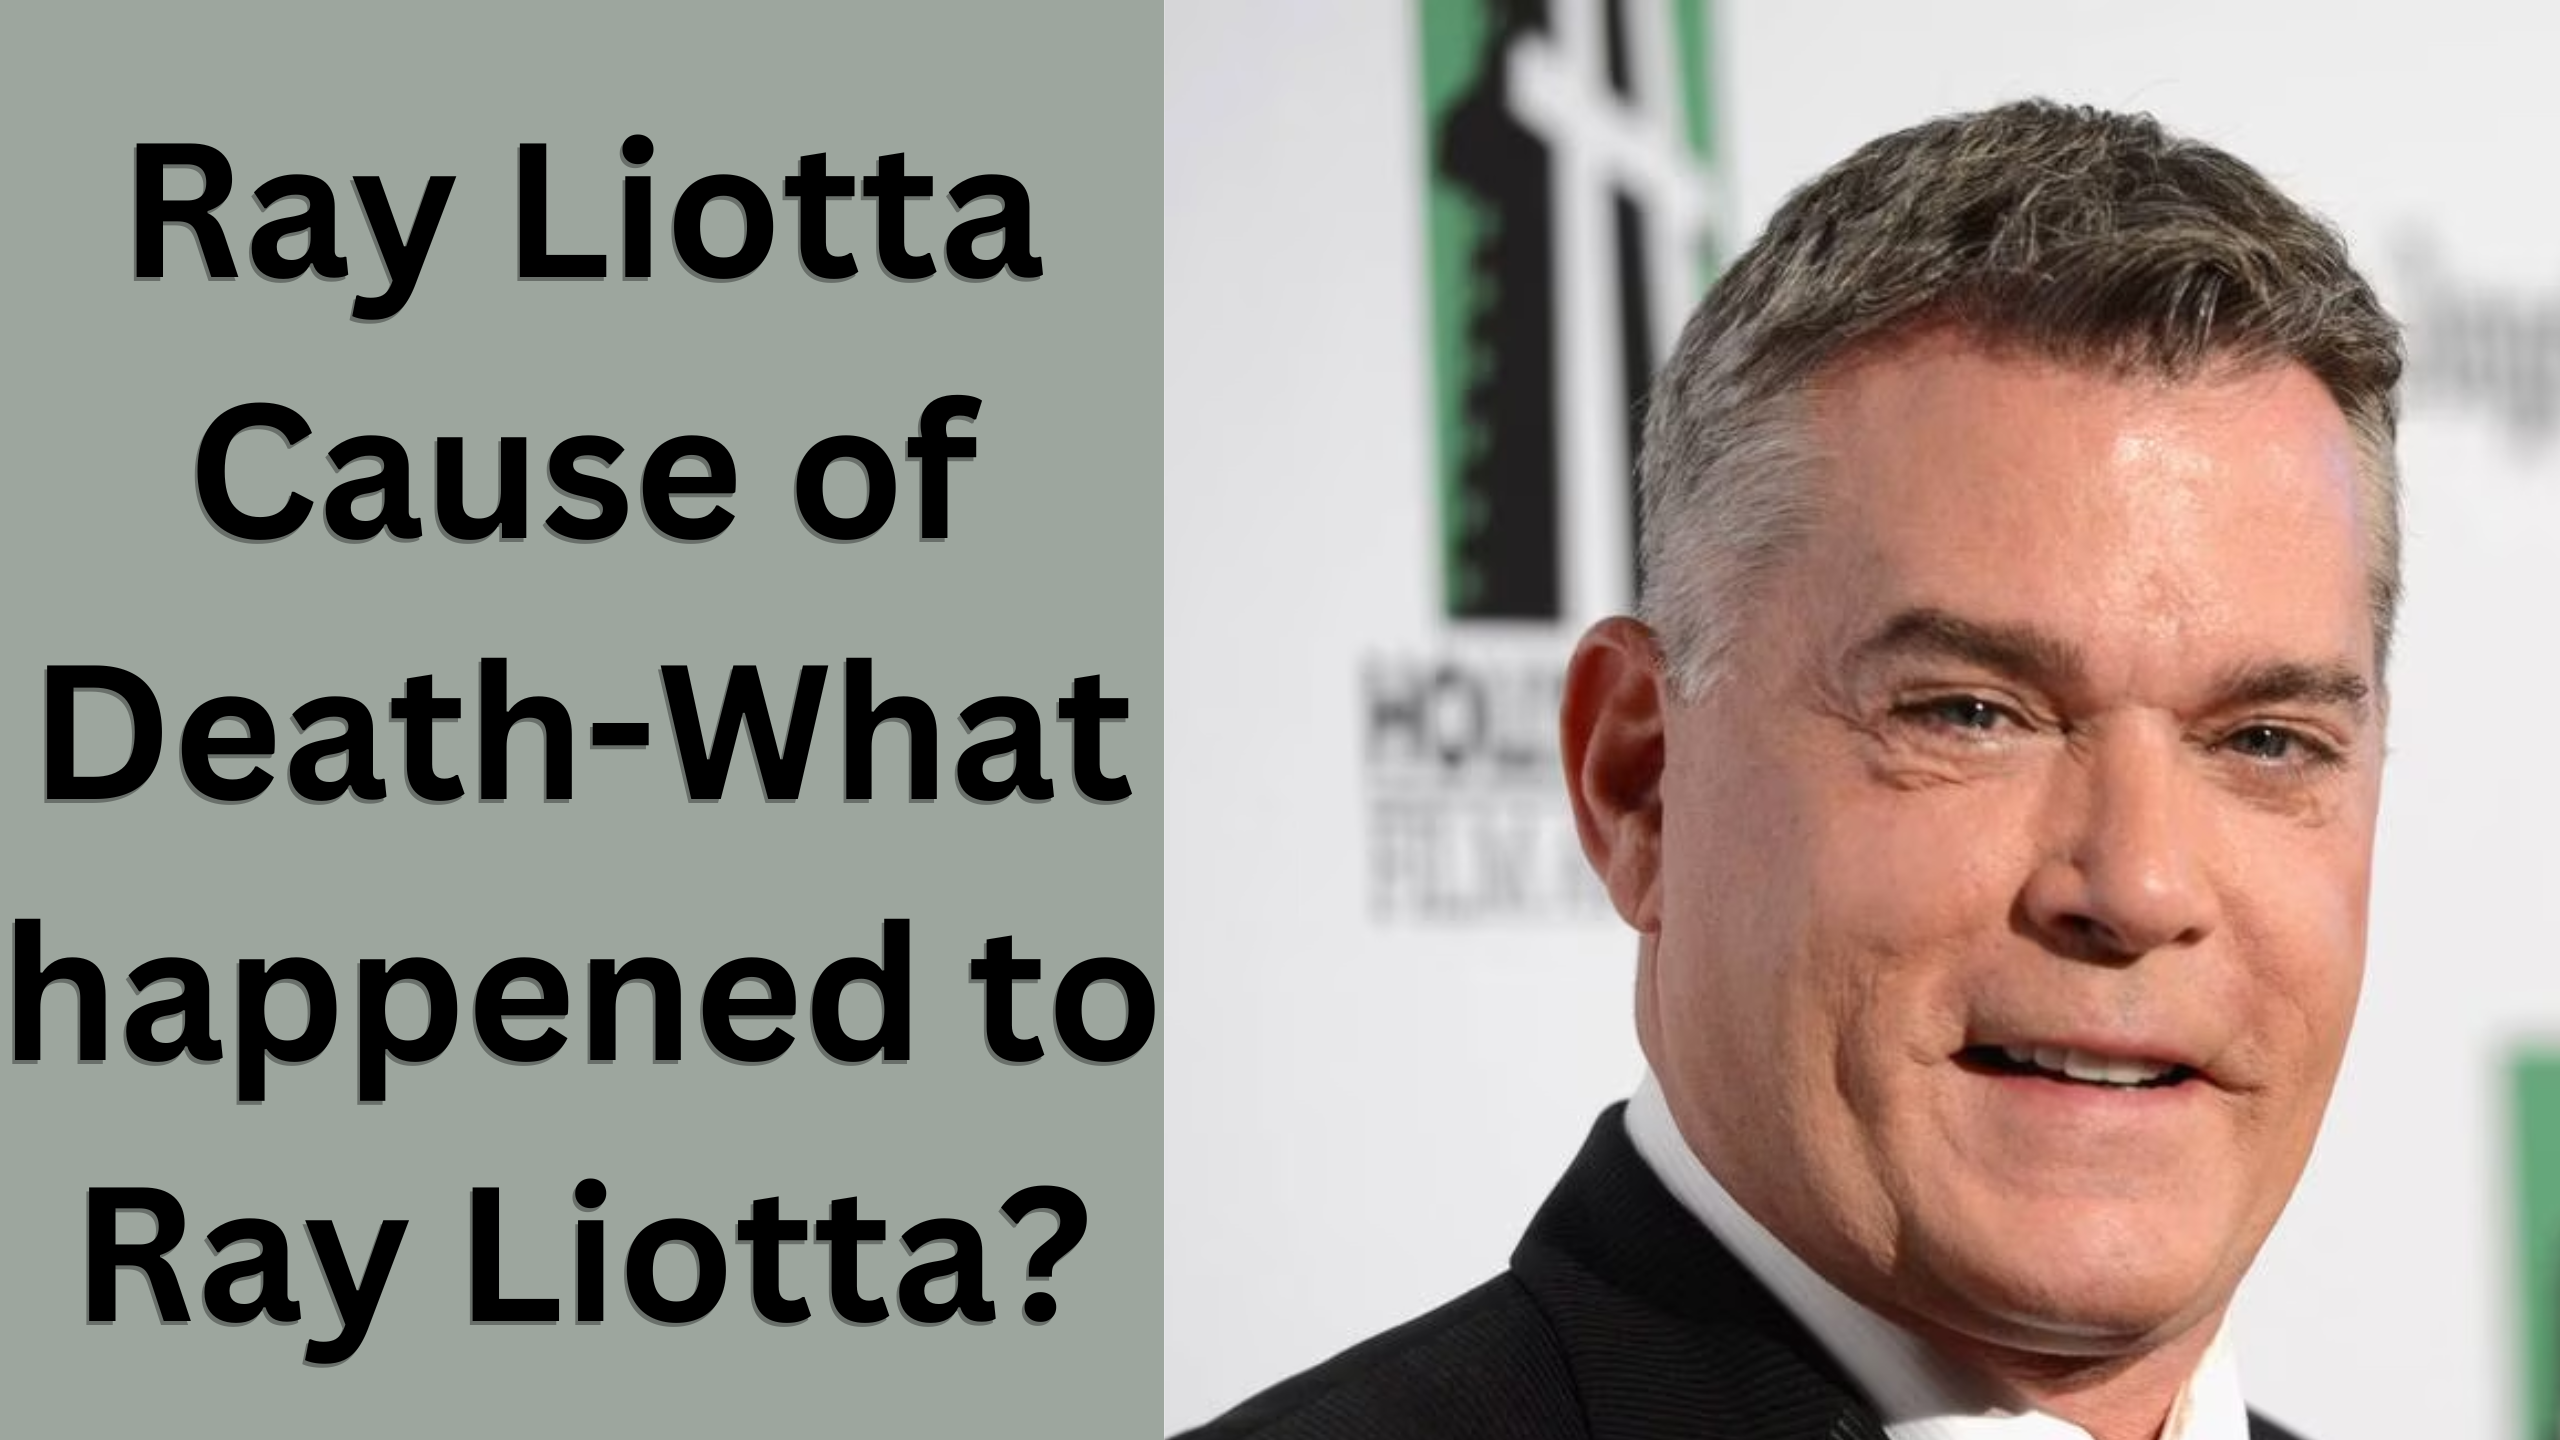 Ray Liotta Cause of Death-What happened to Ray Liotta